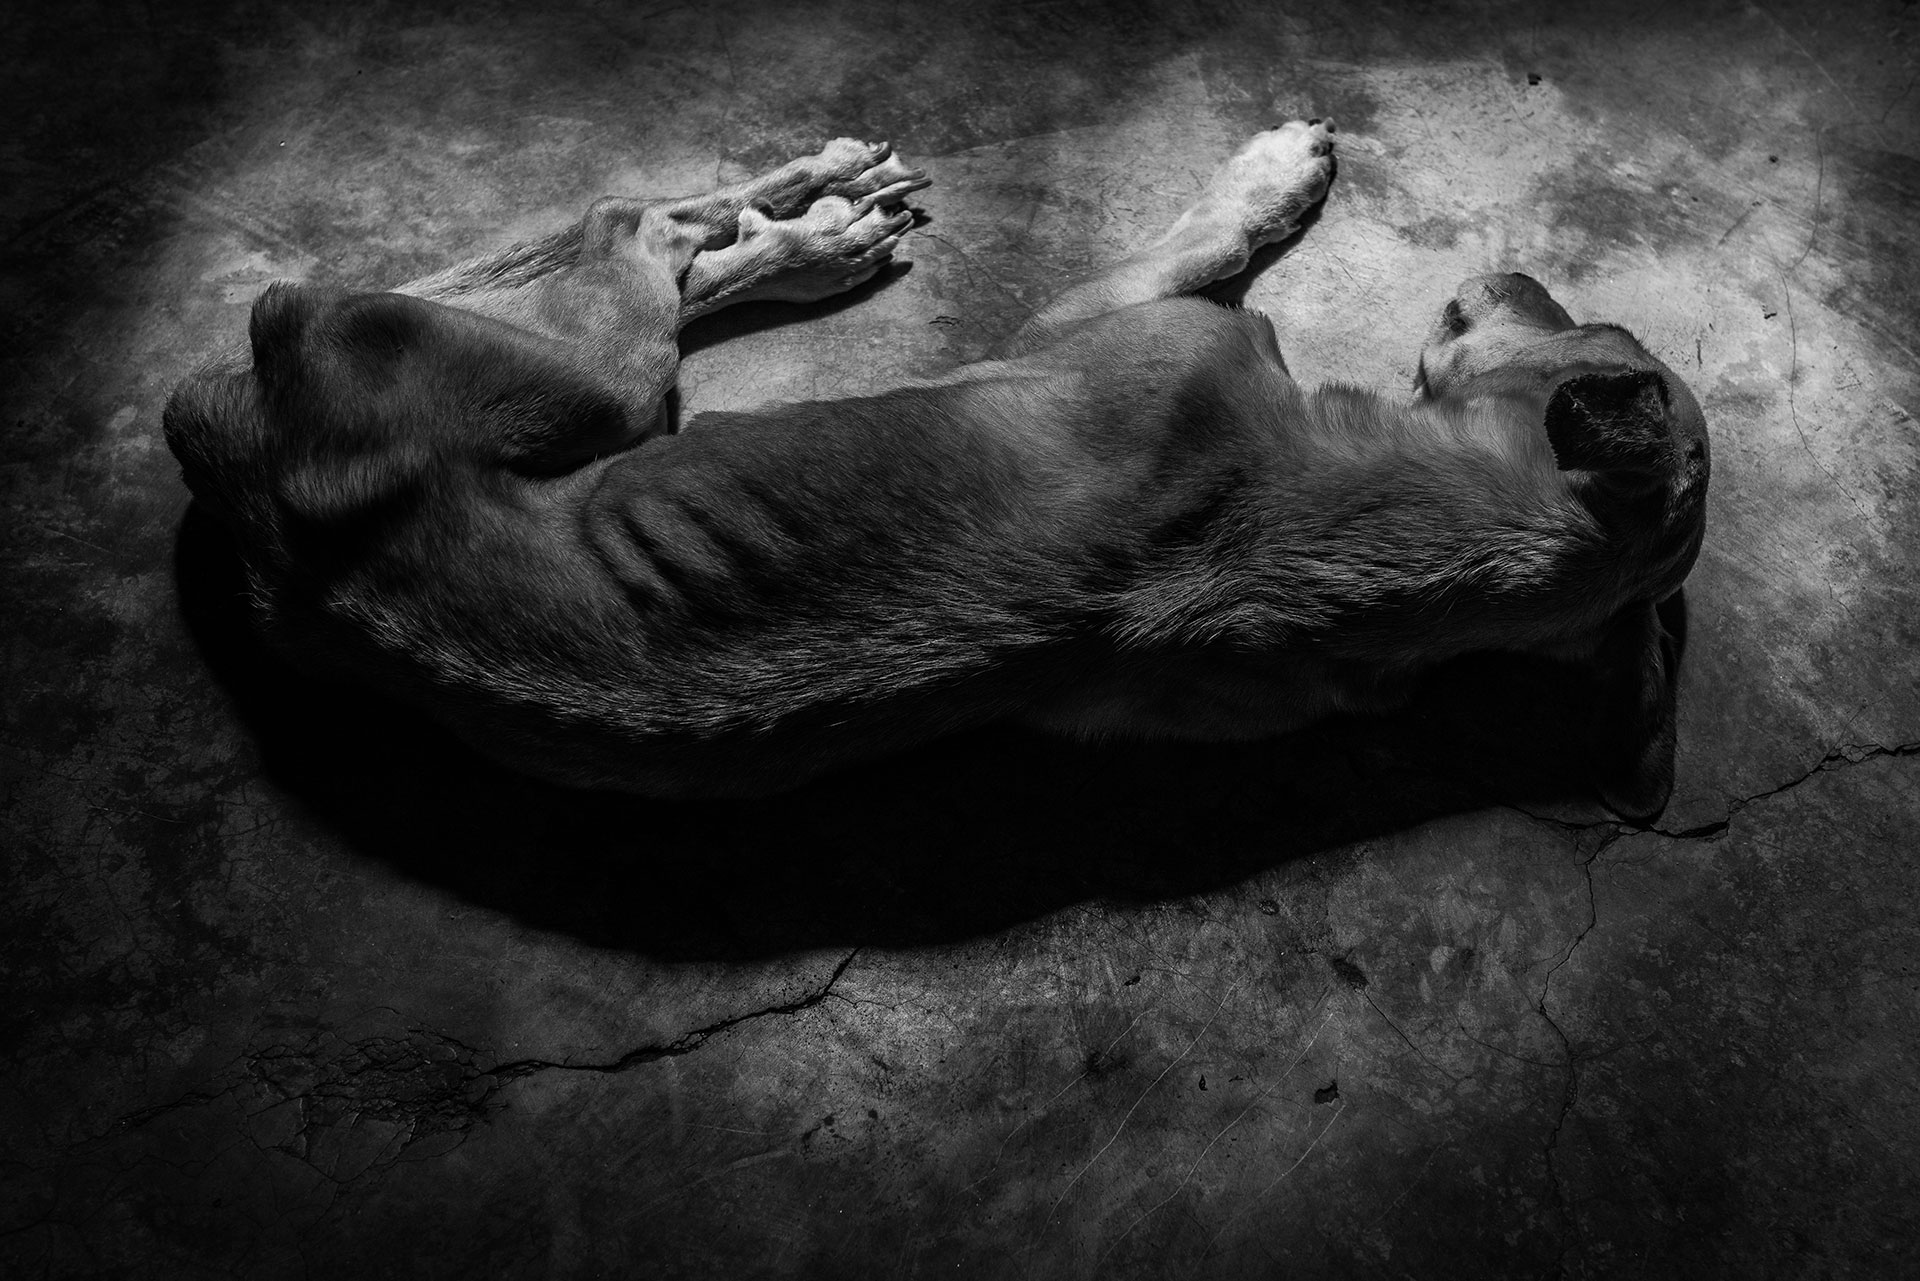 A starving dog sleeps on the ground. According to the ENCOVI survey, 64% of Venezuelans lost weight in 2017.